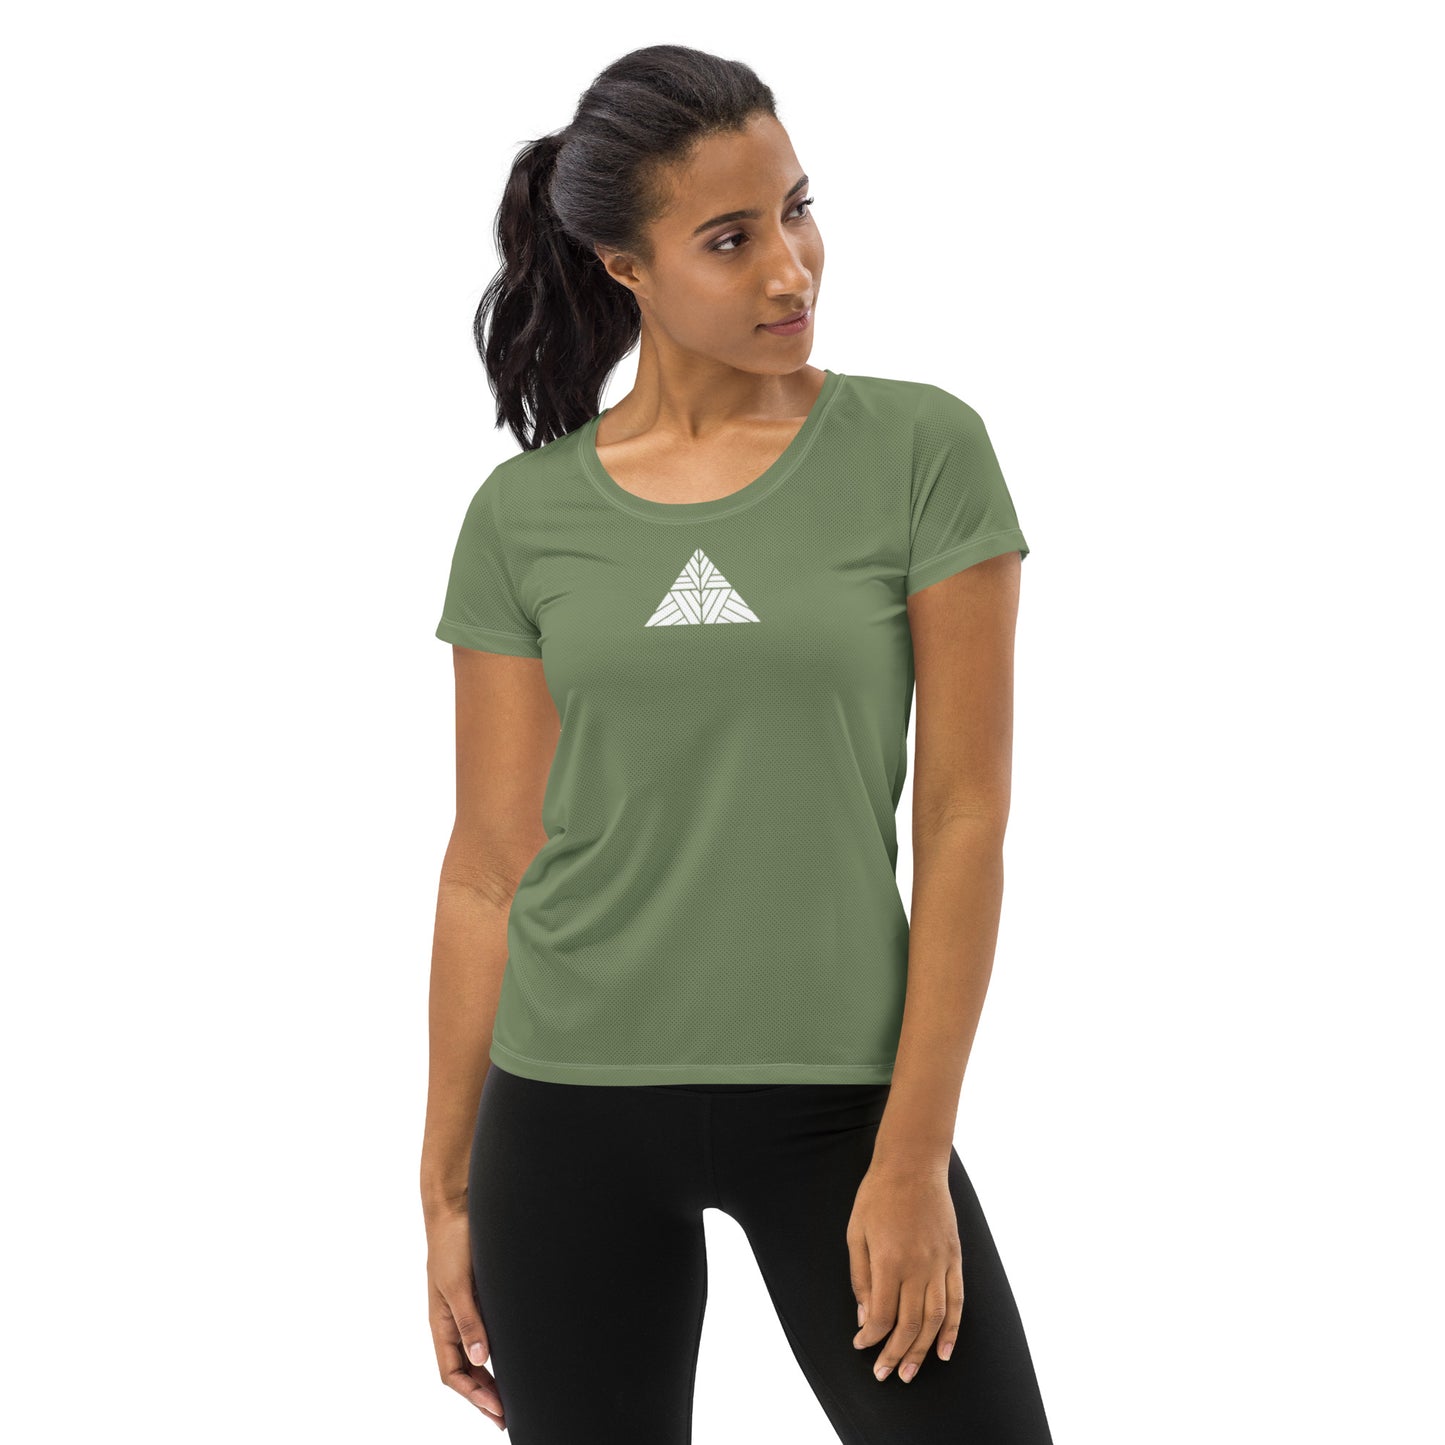 Maui Grown Cannacenter Women's Athletic T-shirt - Camouflage Green